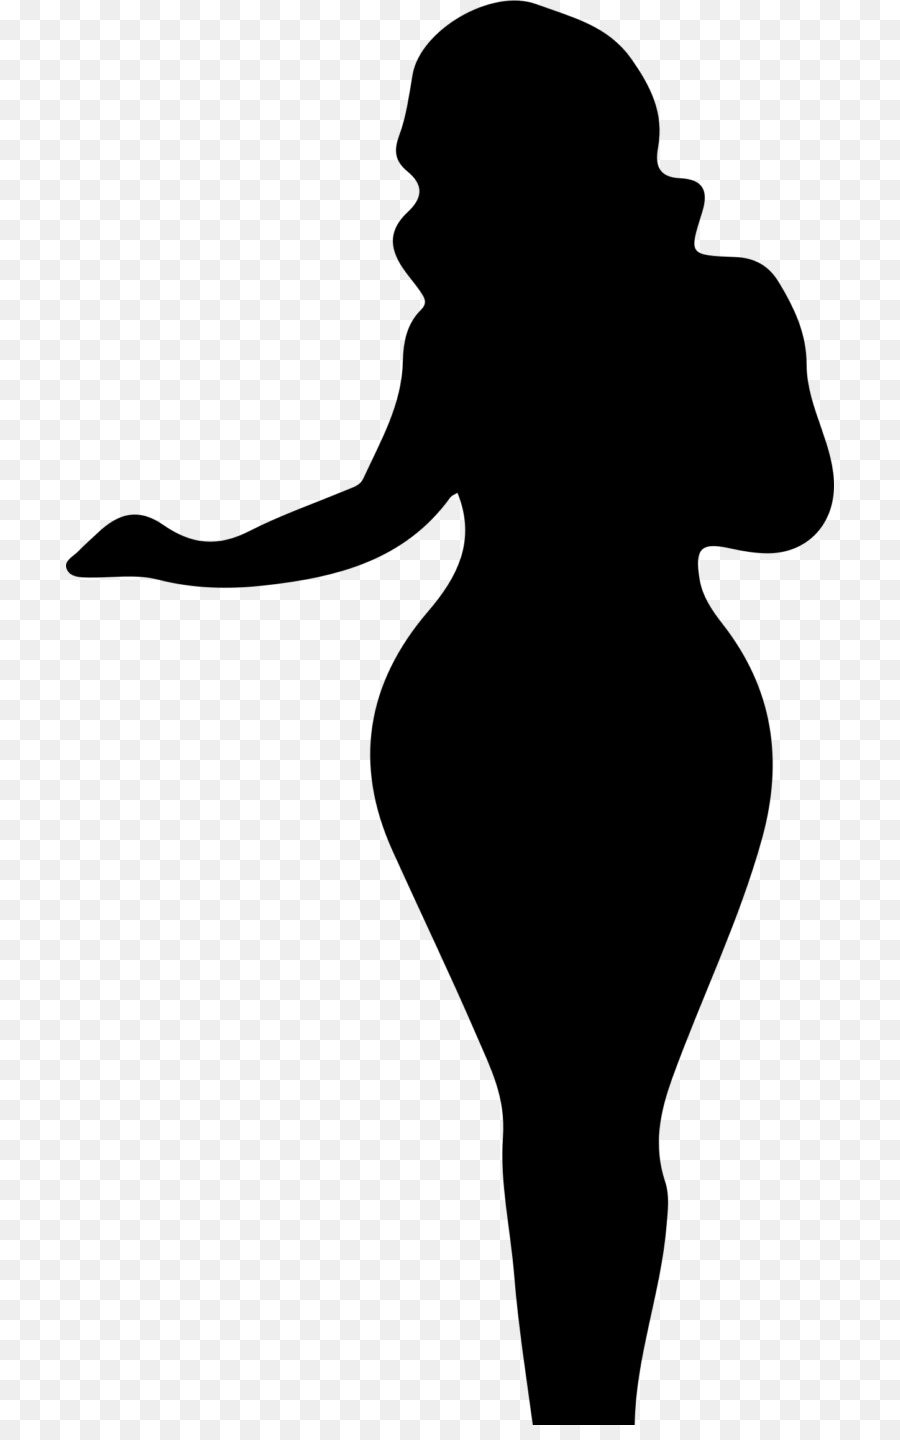 Silhouette - woman vector png download - 768*1425 - Free Transparent Silhouette png Download.